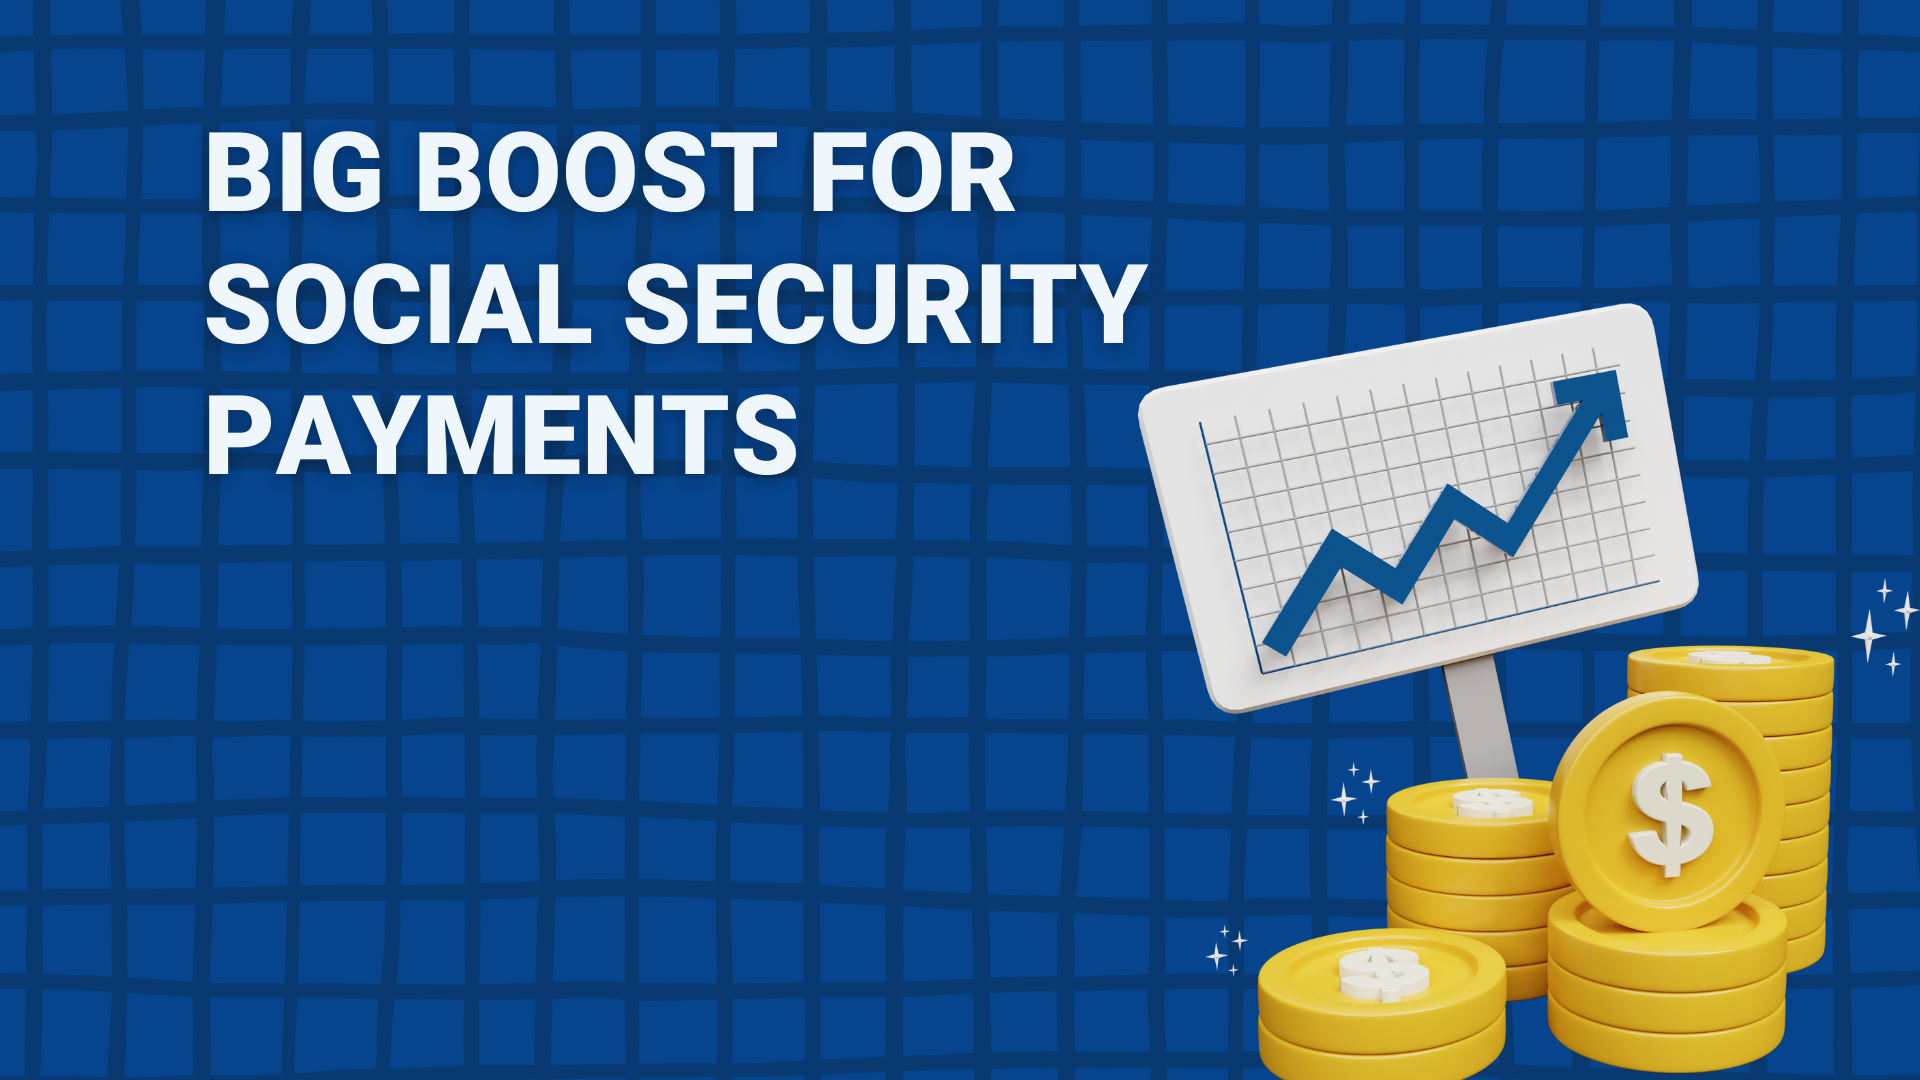 Big Boost for Social Security Payments